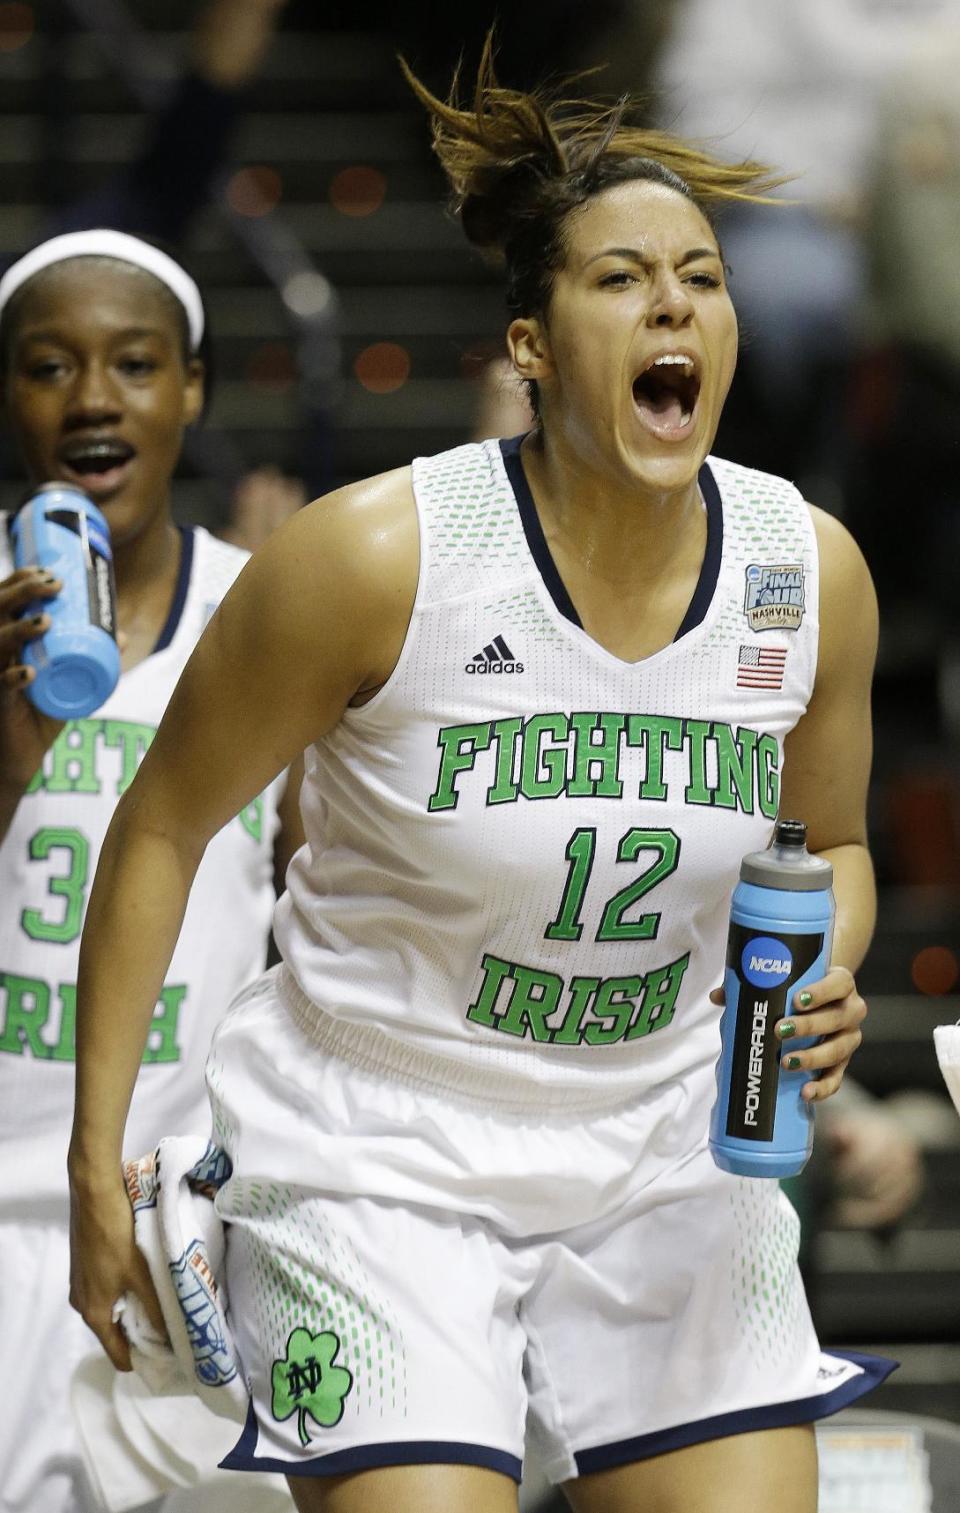 Notre Dame forward Taya Reimer (12) celebrates during the second half of the semifinal game against Maryland in the Final Four of the NCAA women's college basketball tournament, Sunday, April 6, 2014, in Nashville, Tenn. Notre Dame won 87-61. (AP Photo/Mark Humphrey)